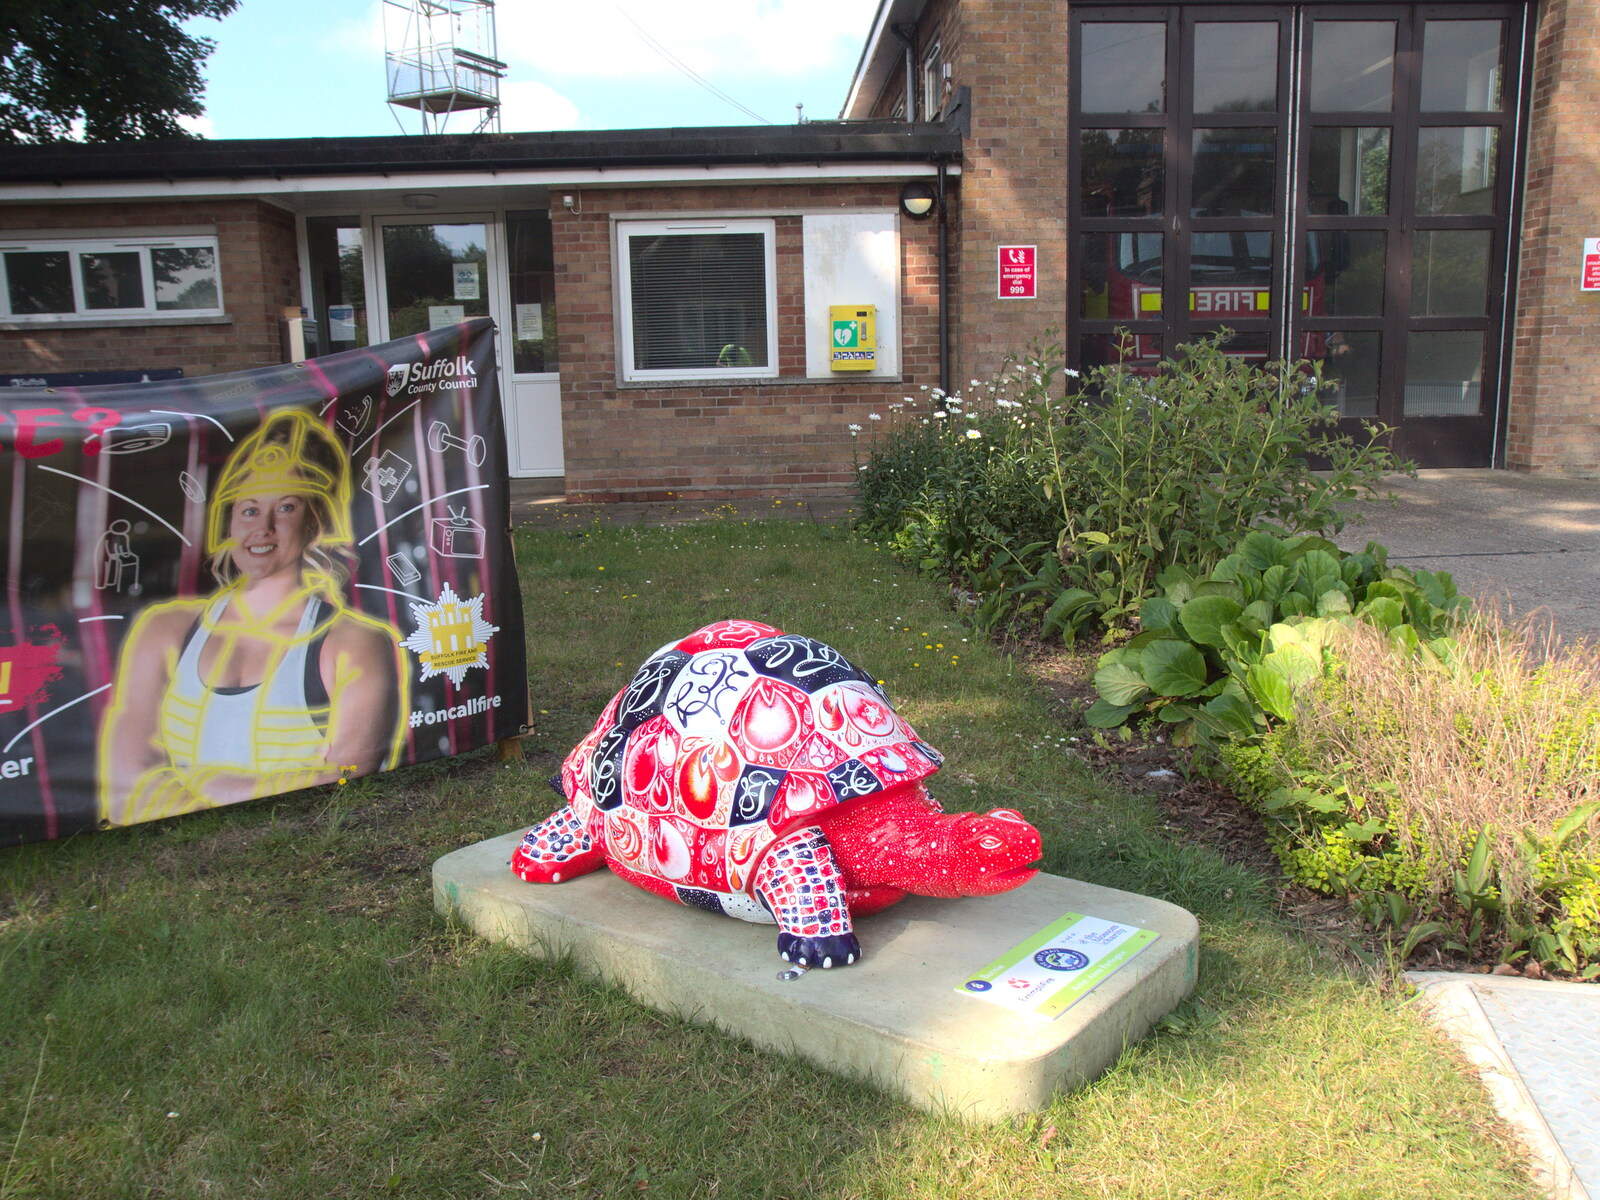 Tortoise outside the fire station from Hares, Tortoises and Station 119, Eye, Suffolk - 19th July 2021